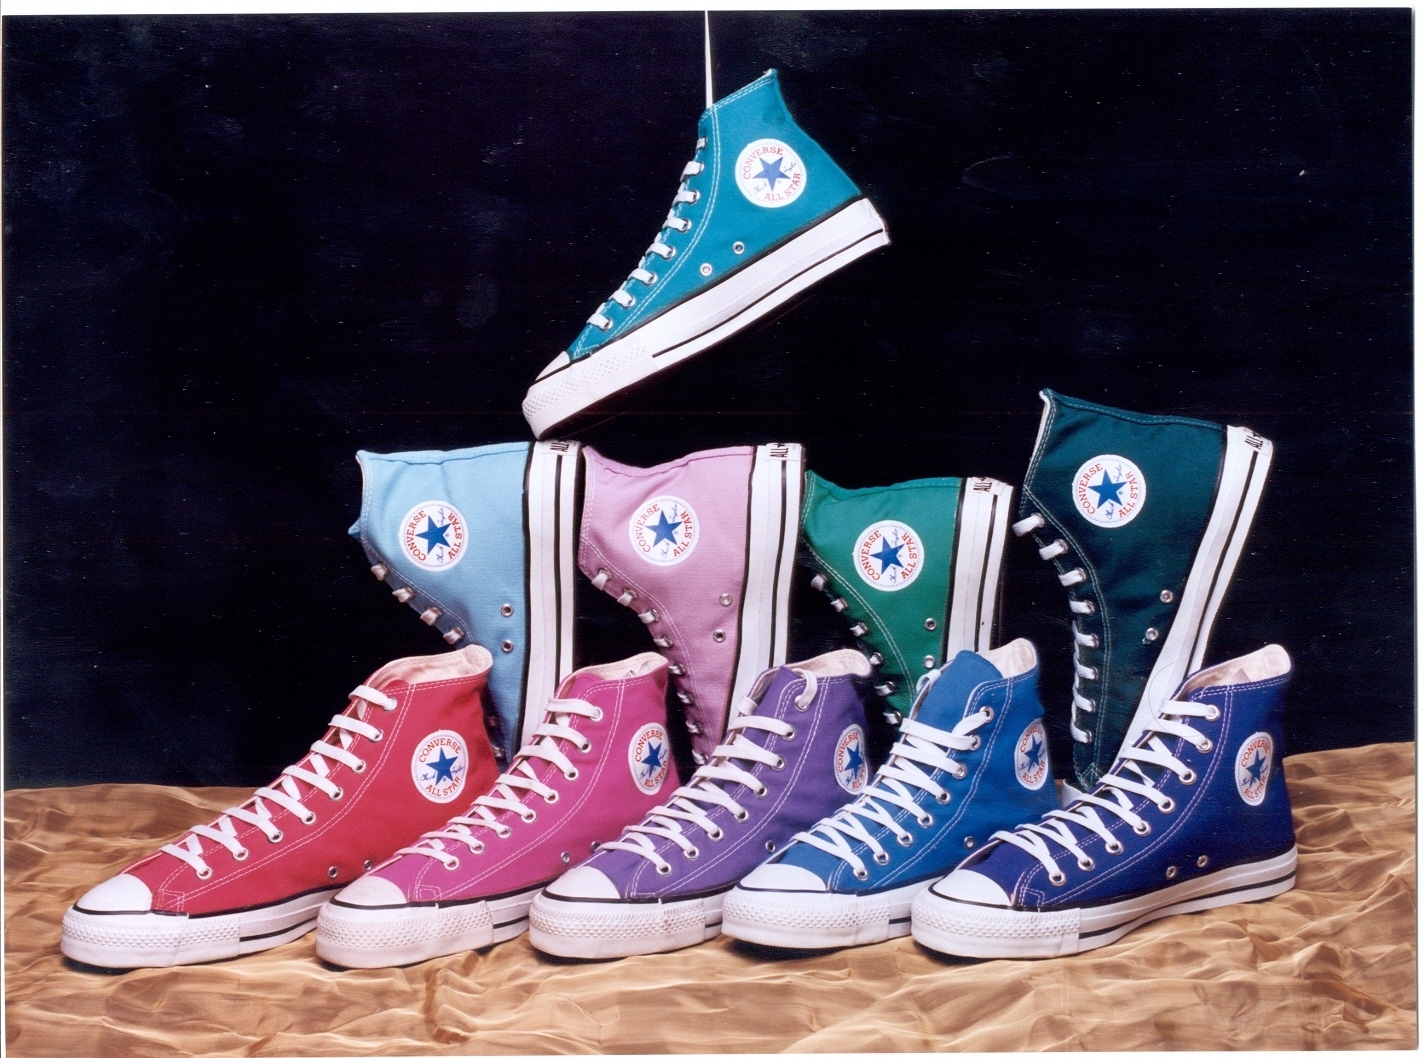 Shoes: All Star.1424 x 1058